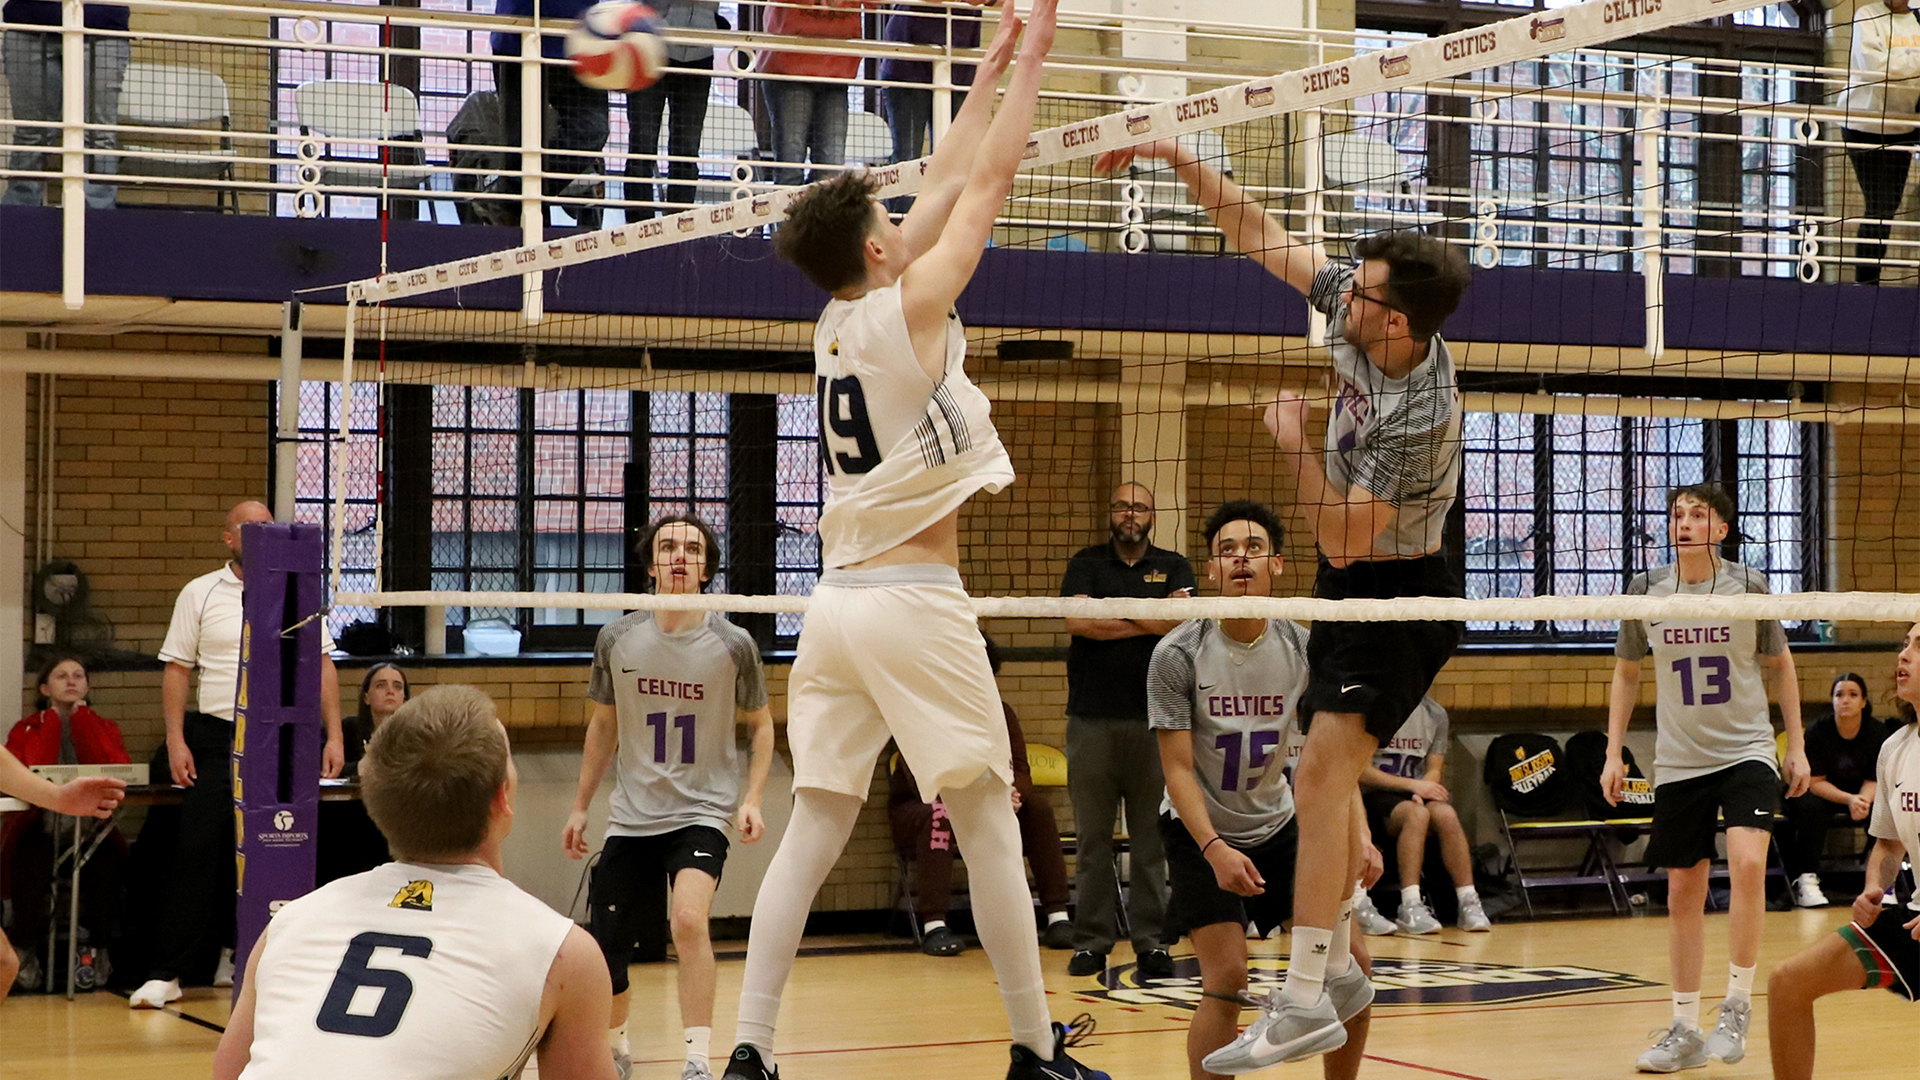 Will Piccolino tallied a game- and season-high 33 kills. Photo by Robert Cifone.